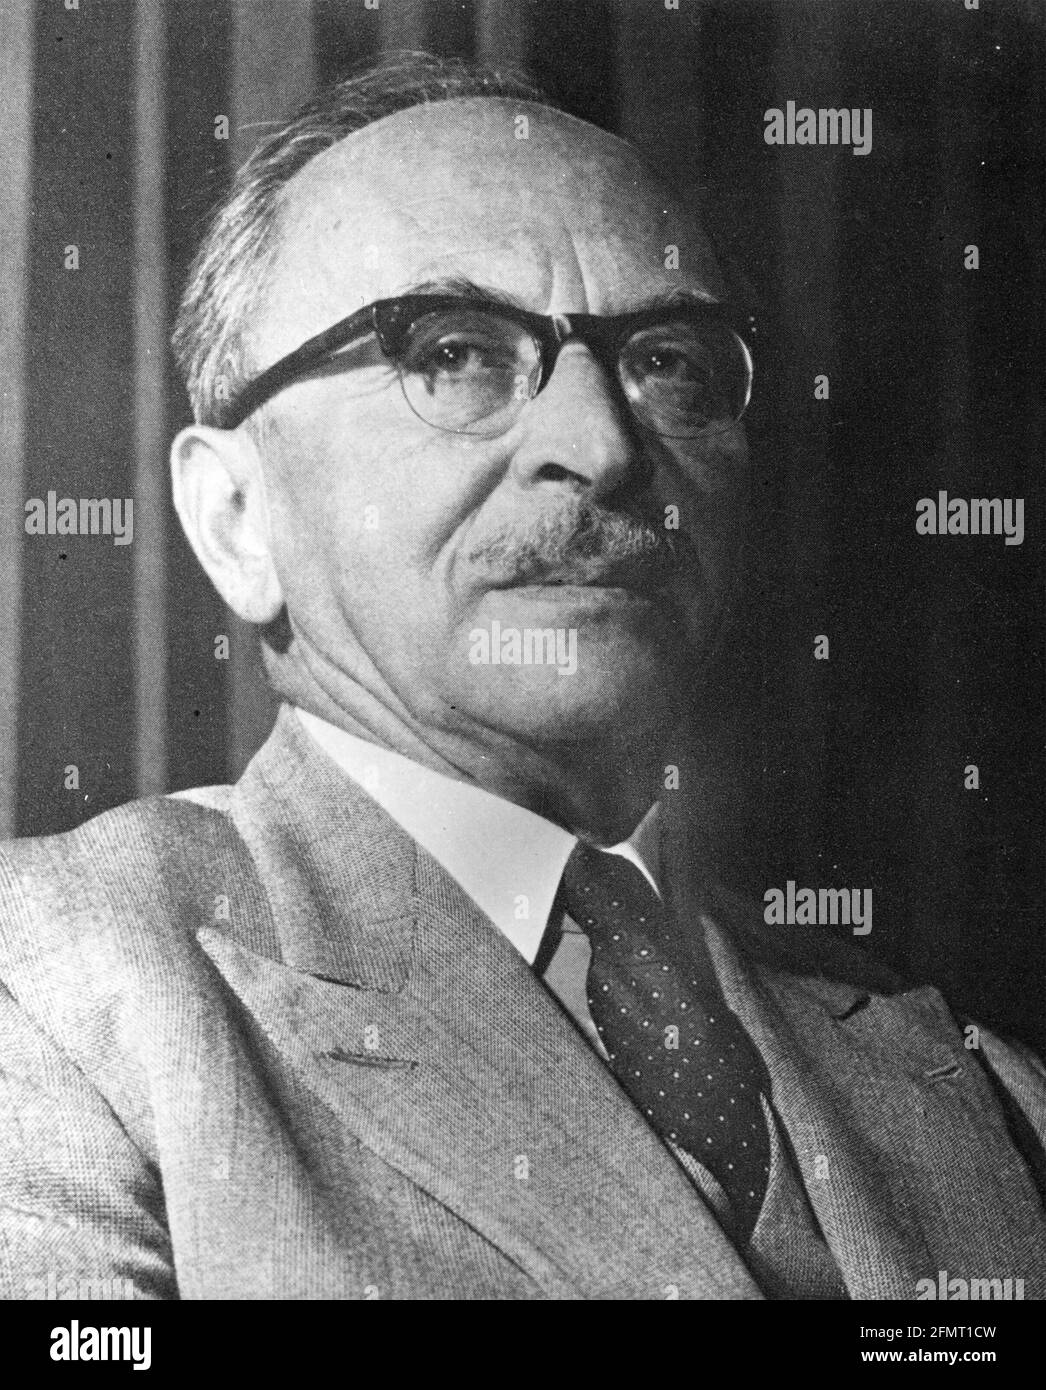 klasselærer Rusten ciffer DENNIS GABOR (1900-1979) Anglo-Hungarian physicist and electrical engineer  who invented holography. Photo: Siemens Stock Photo - Alamy